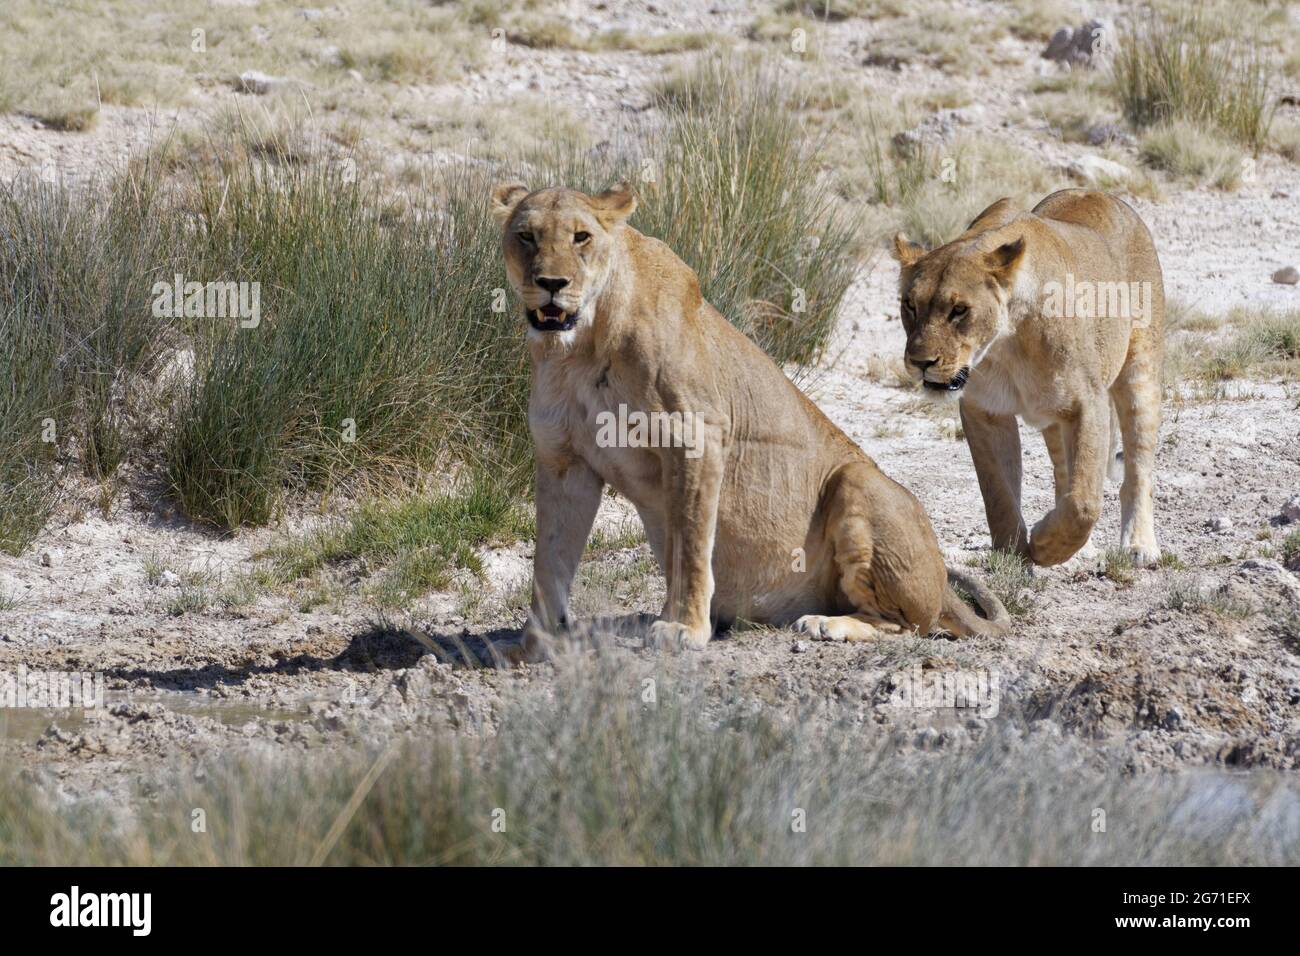 Lionesses (Panthera leo), two adult females at waterhole, one sitting at a puddle, alert, the other walking, Etosha National Park, Namibia, Africa Stock Photo